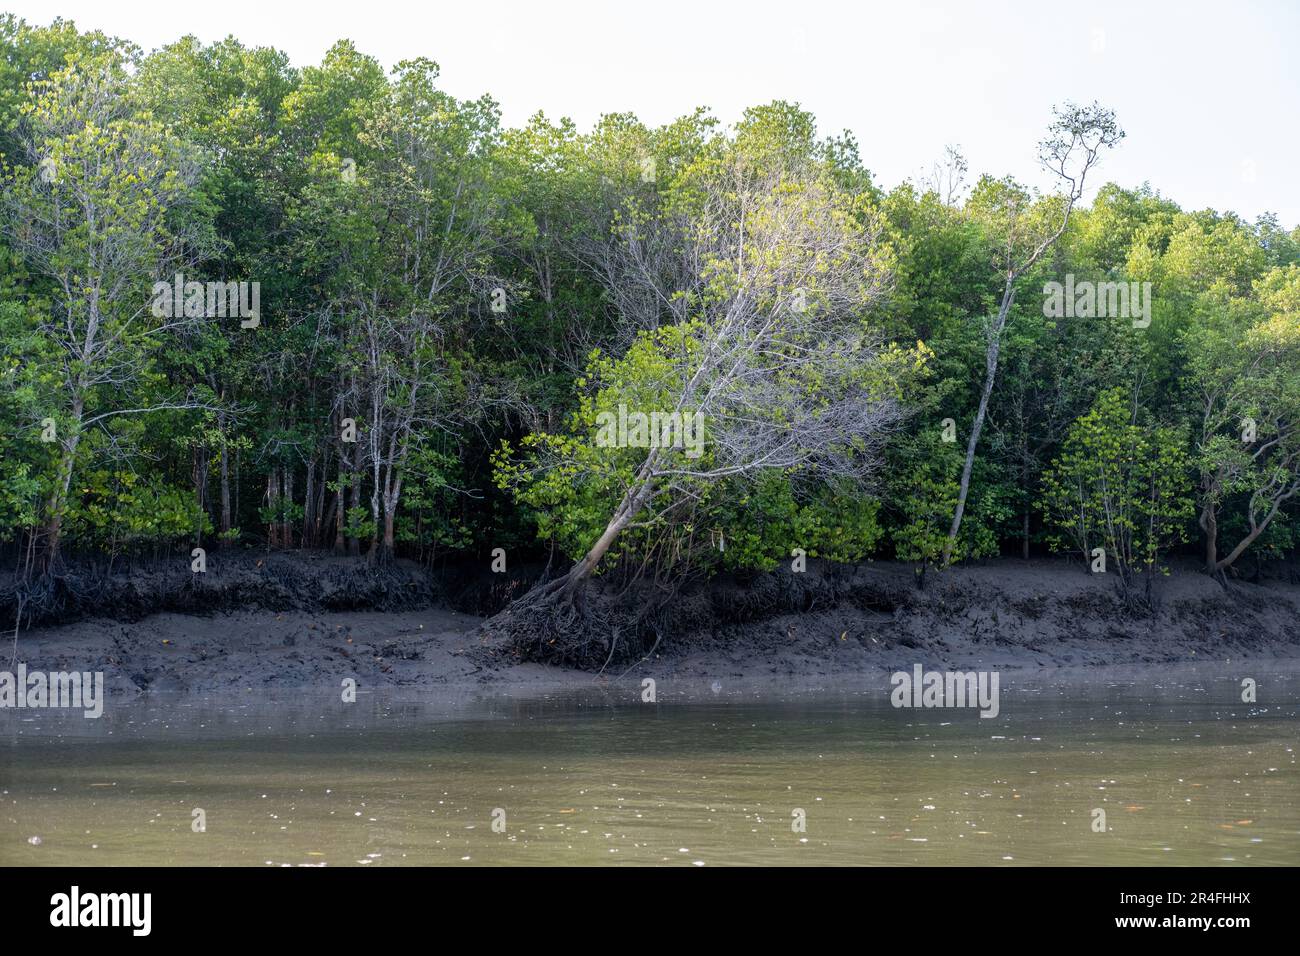 Mangrove forest, including trees and shrubs that grow in saline coastal habitats in the tropics and subtropics Stock Photo